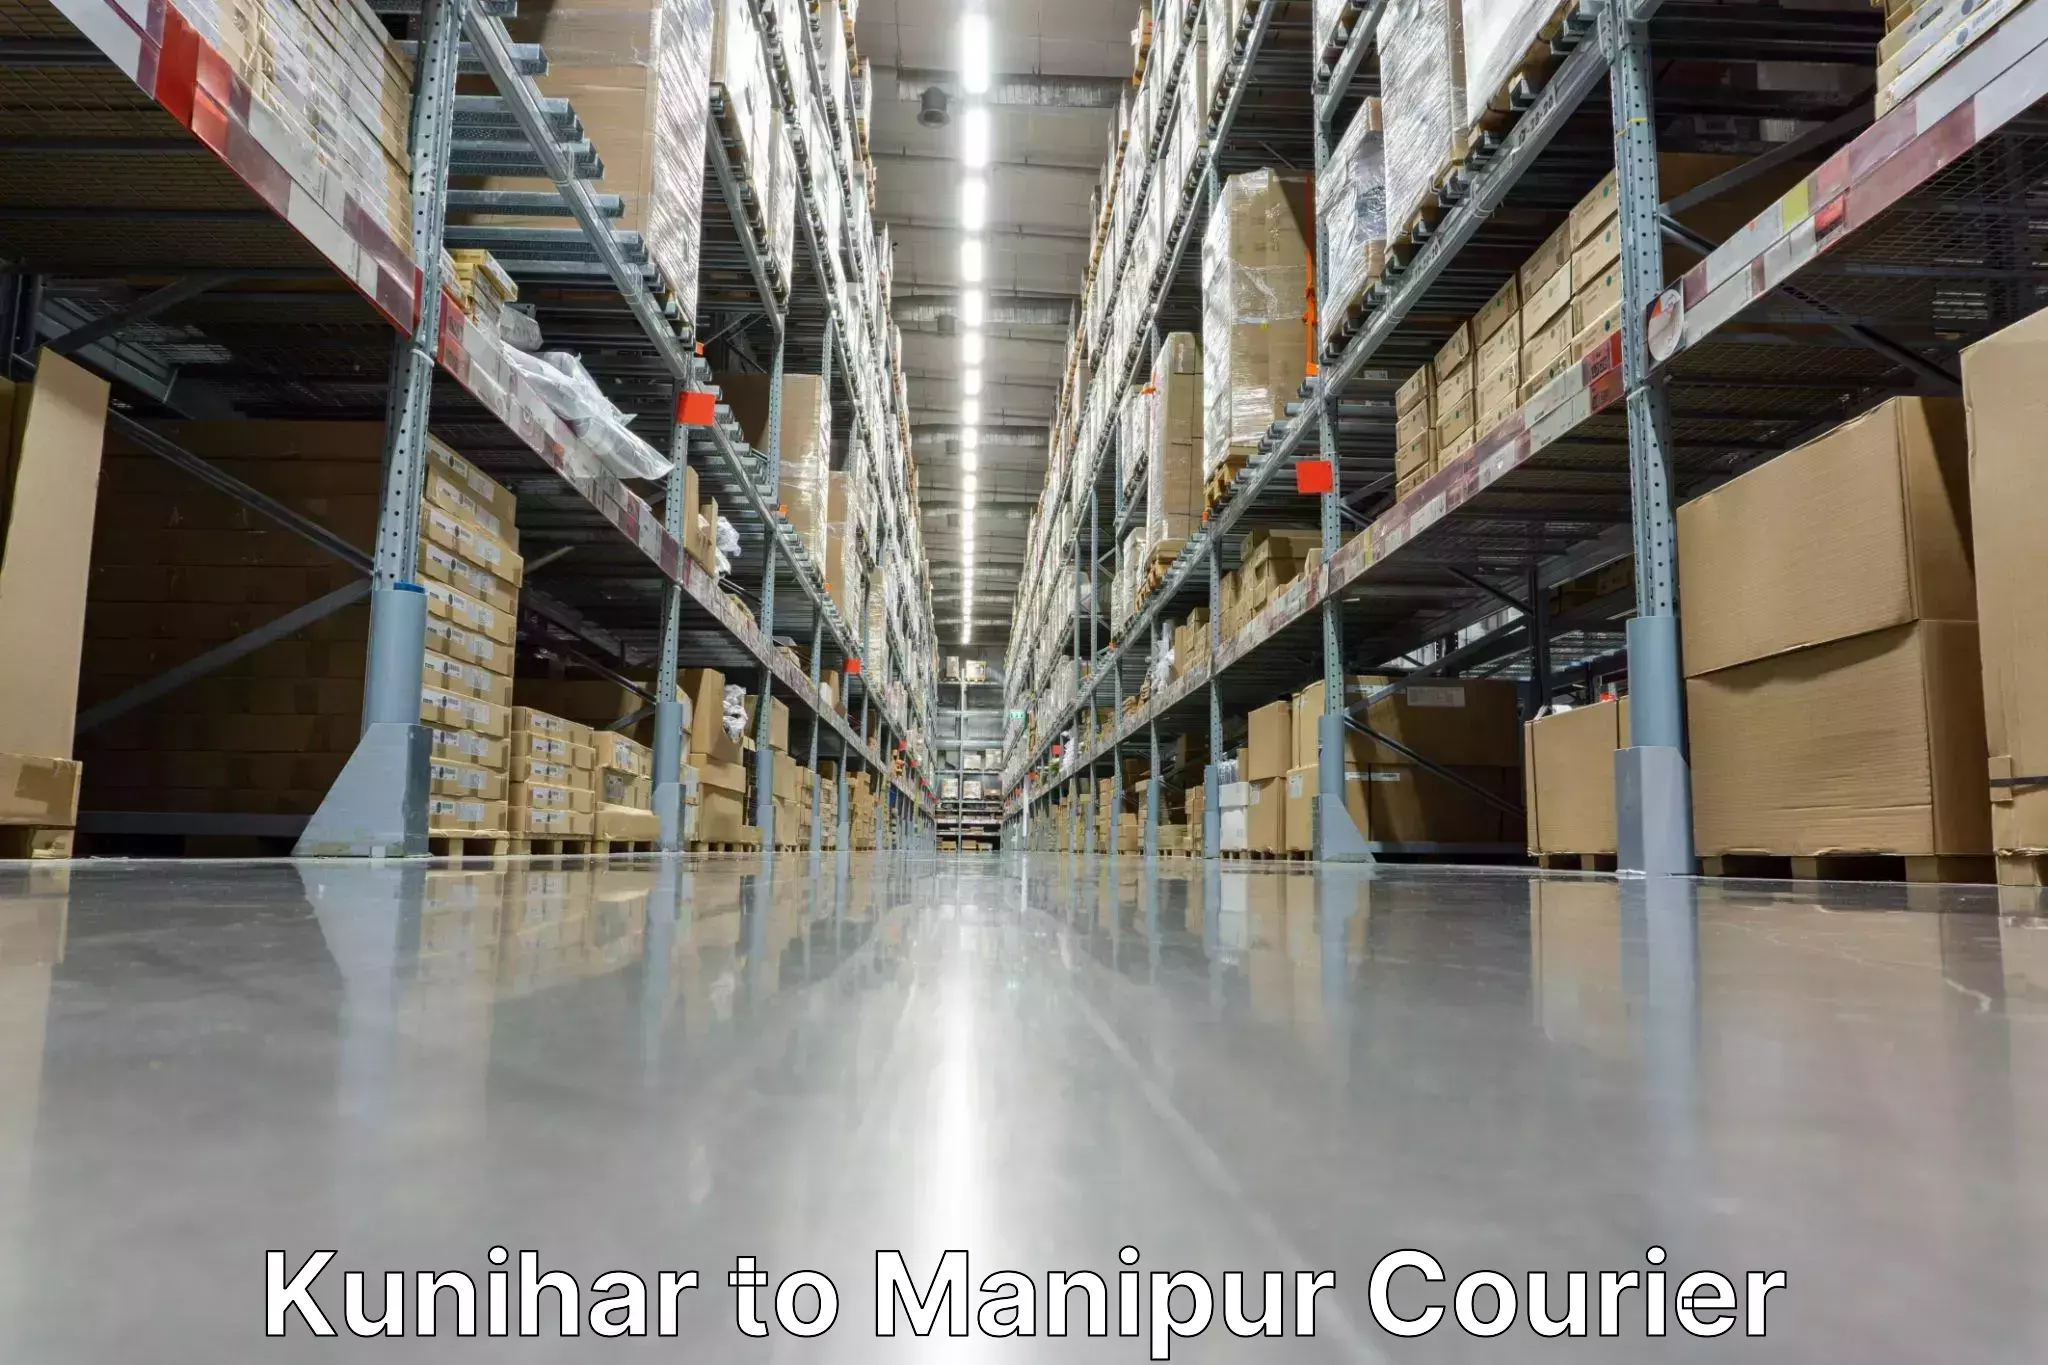 Global shipping networks Kunihar to Manipur